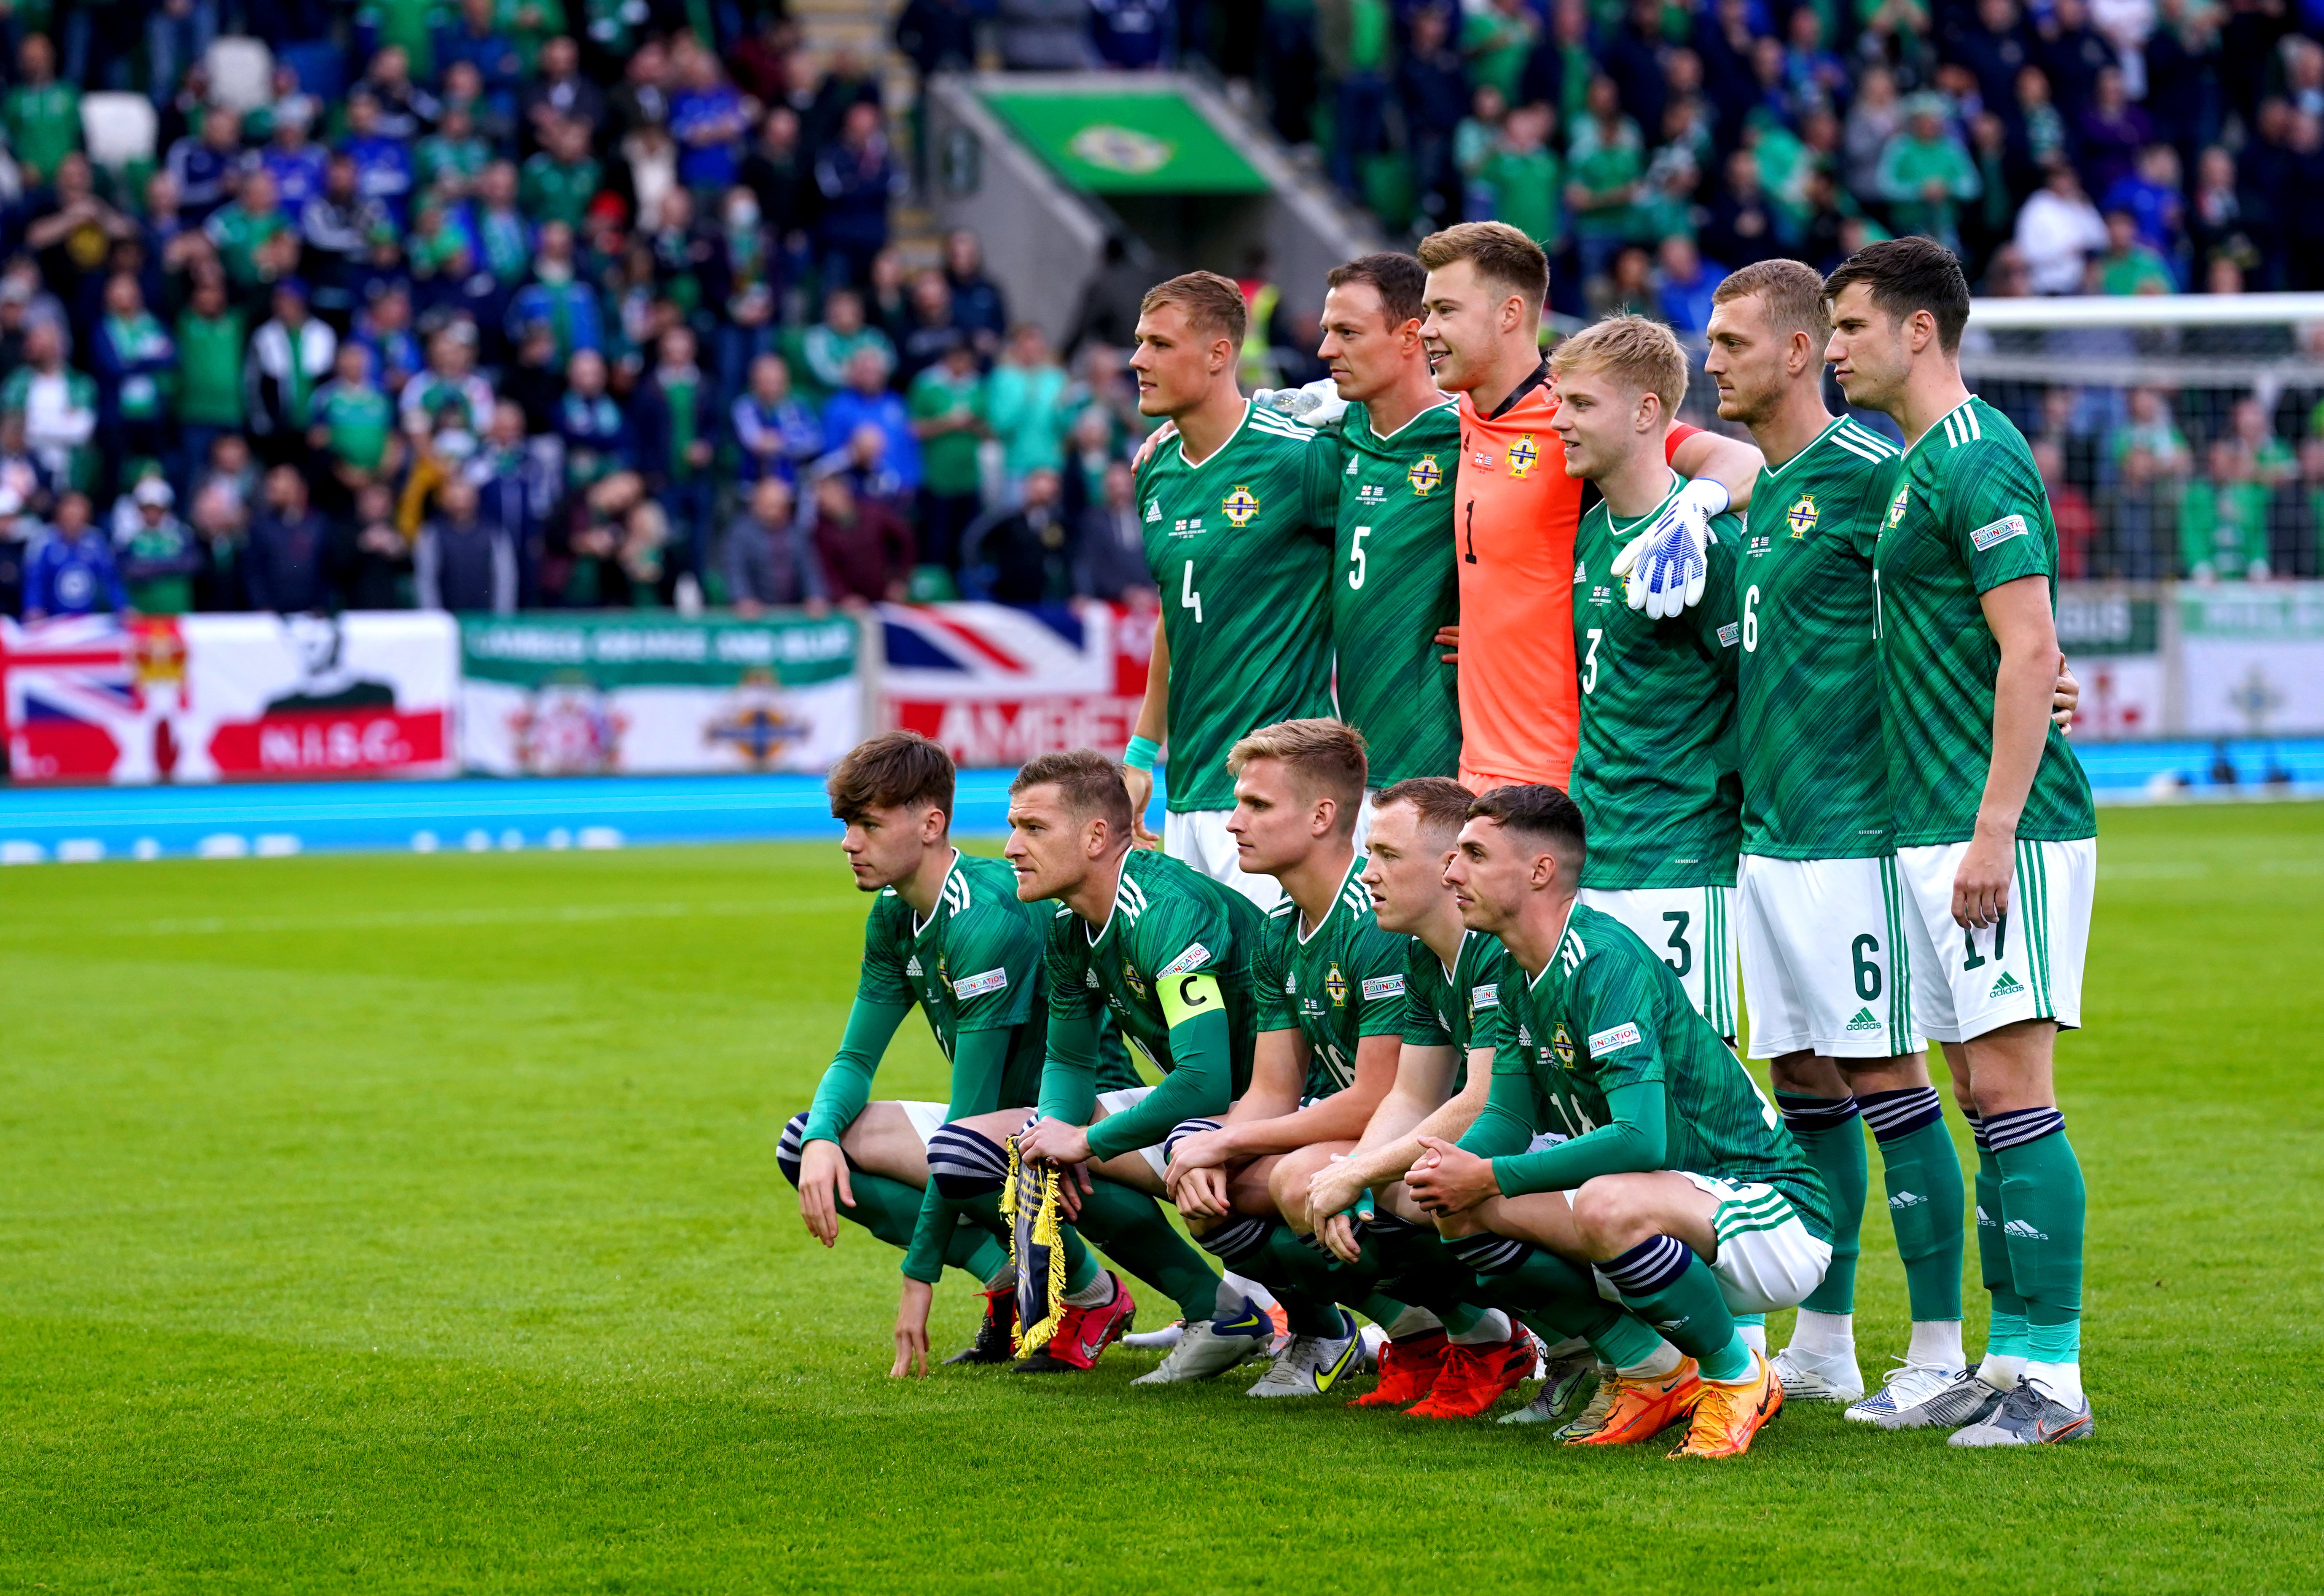 Northern Ireland are looking for a Nations League win (Brian Lawless/PA)